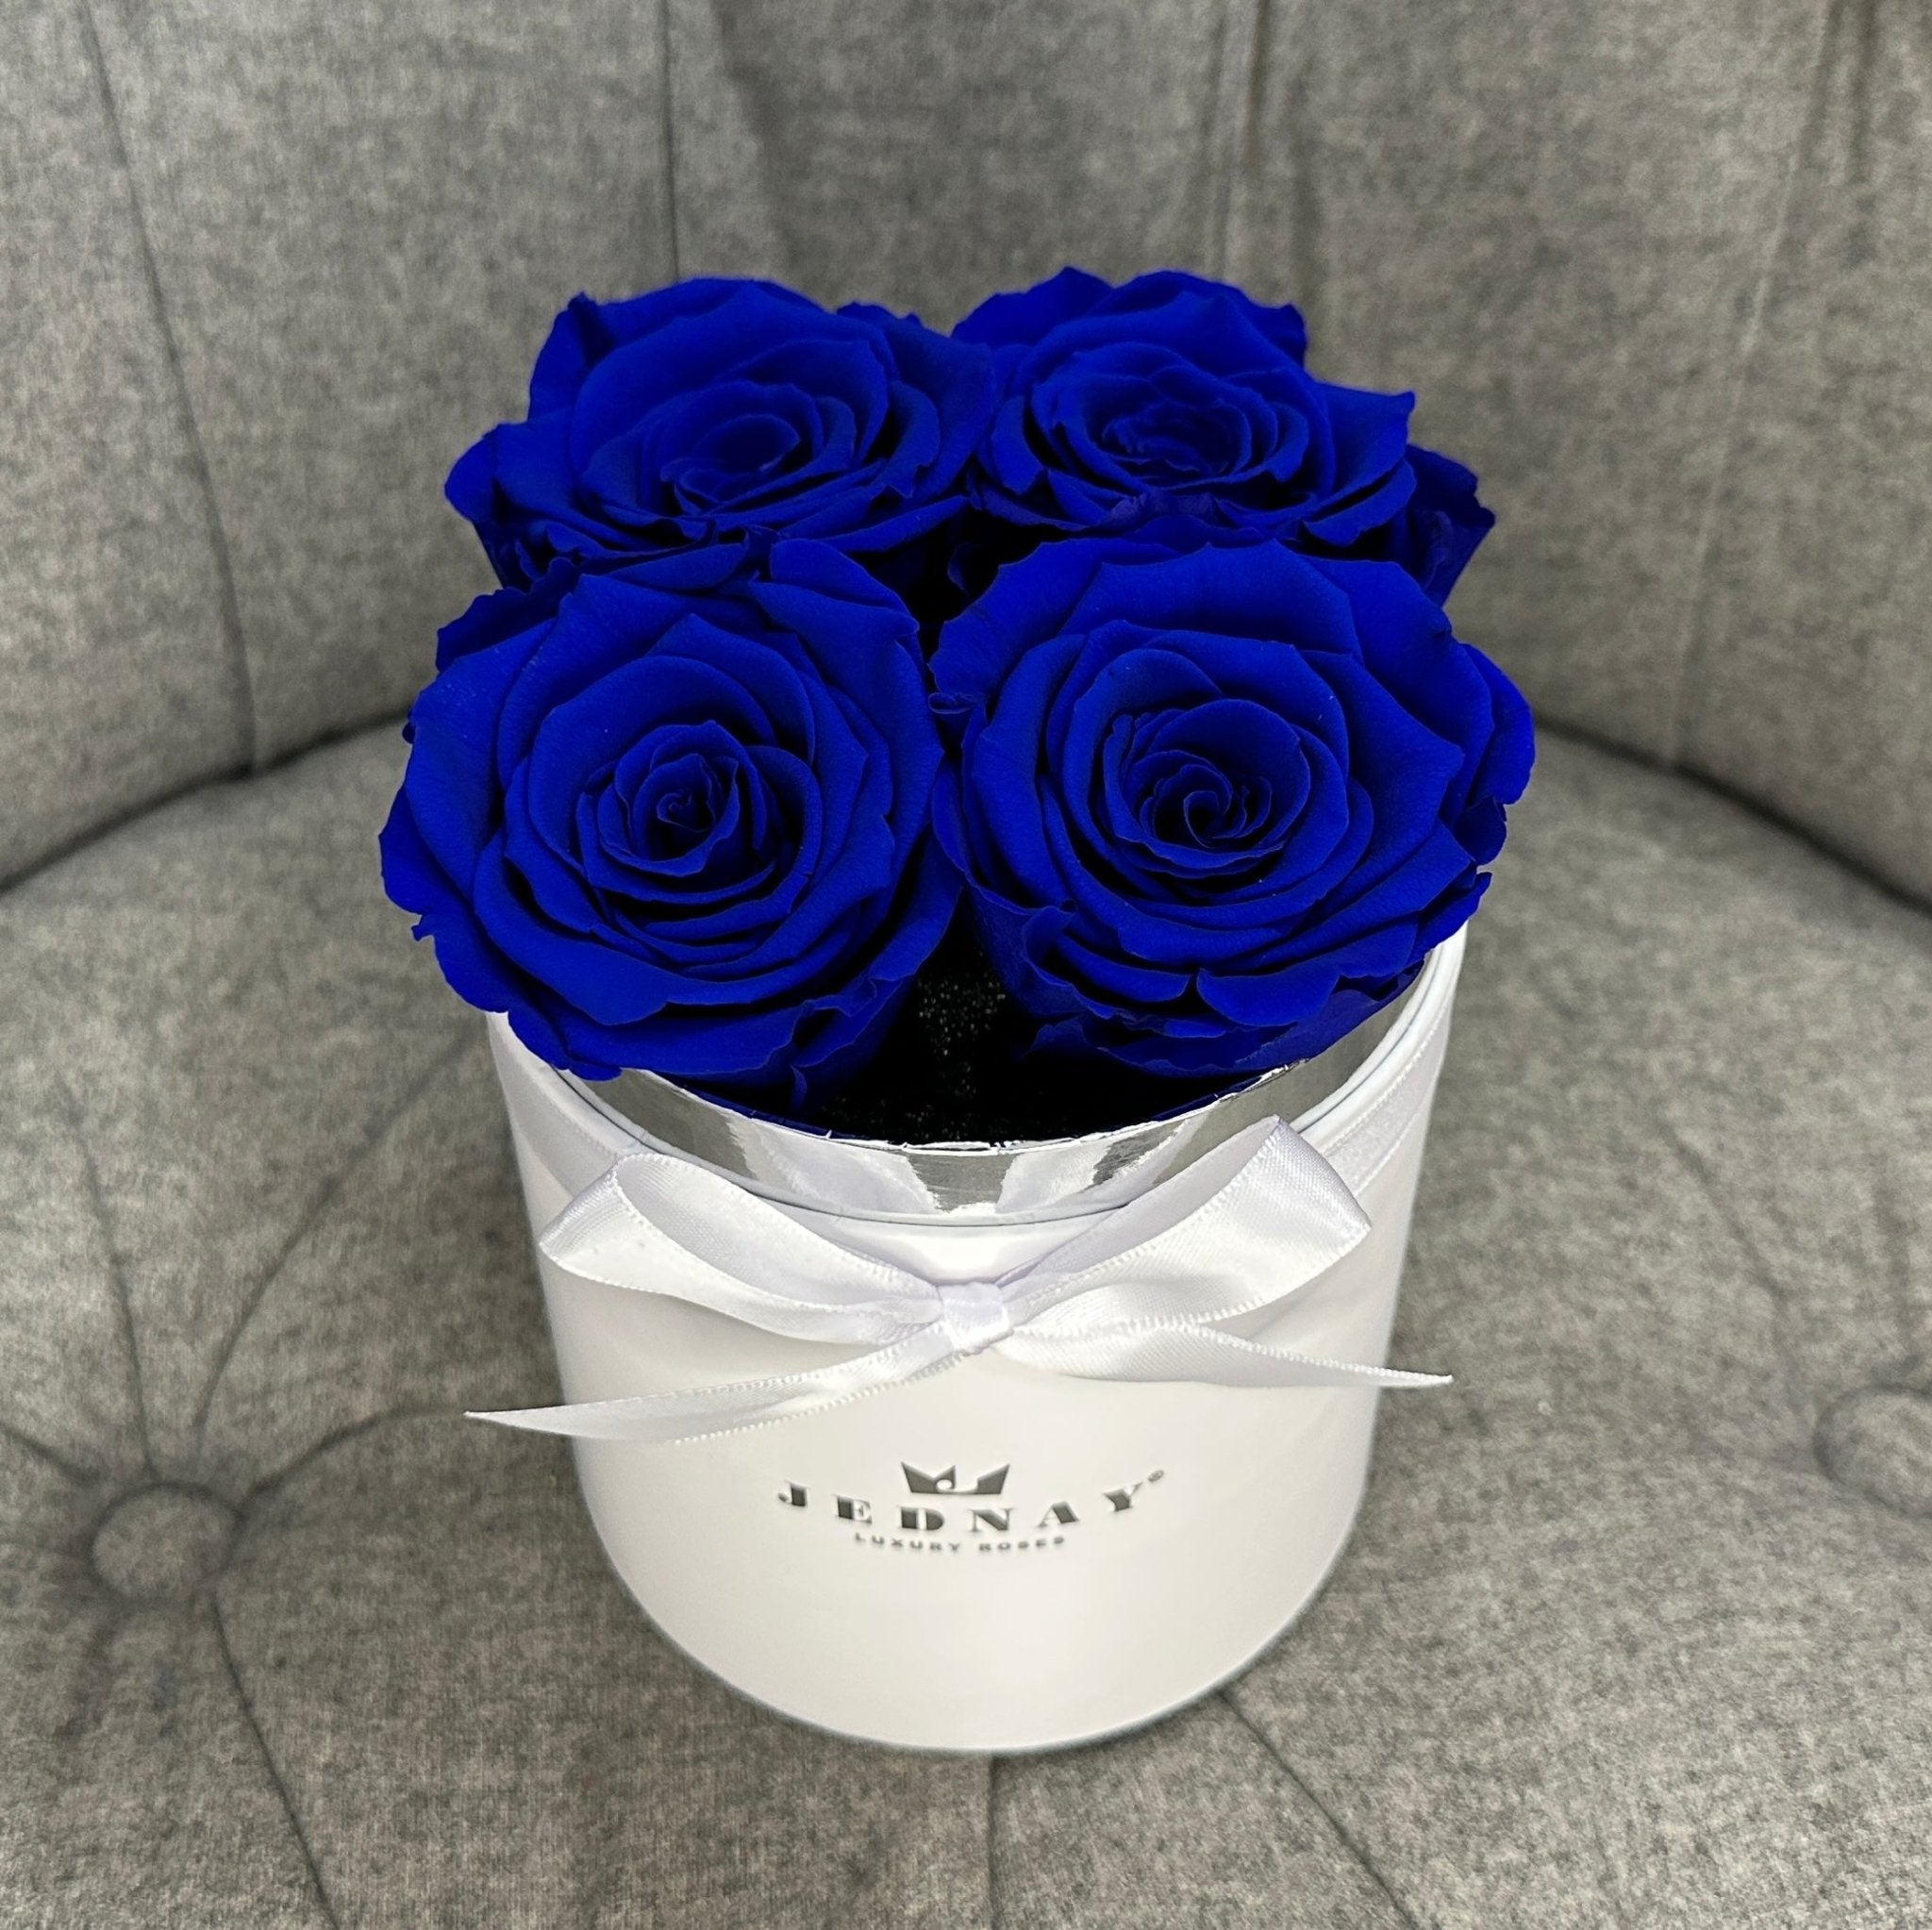 Petite Classic White Forever Rose Box - Deep Blue Sea Eternal Roses - Jednay Roses